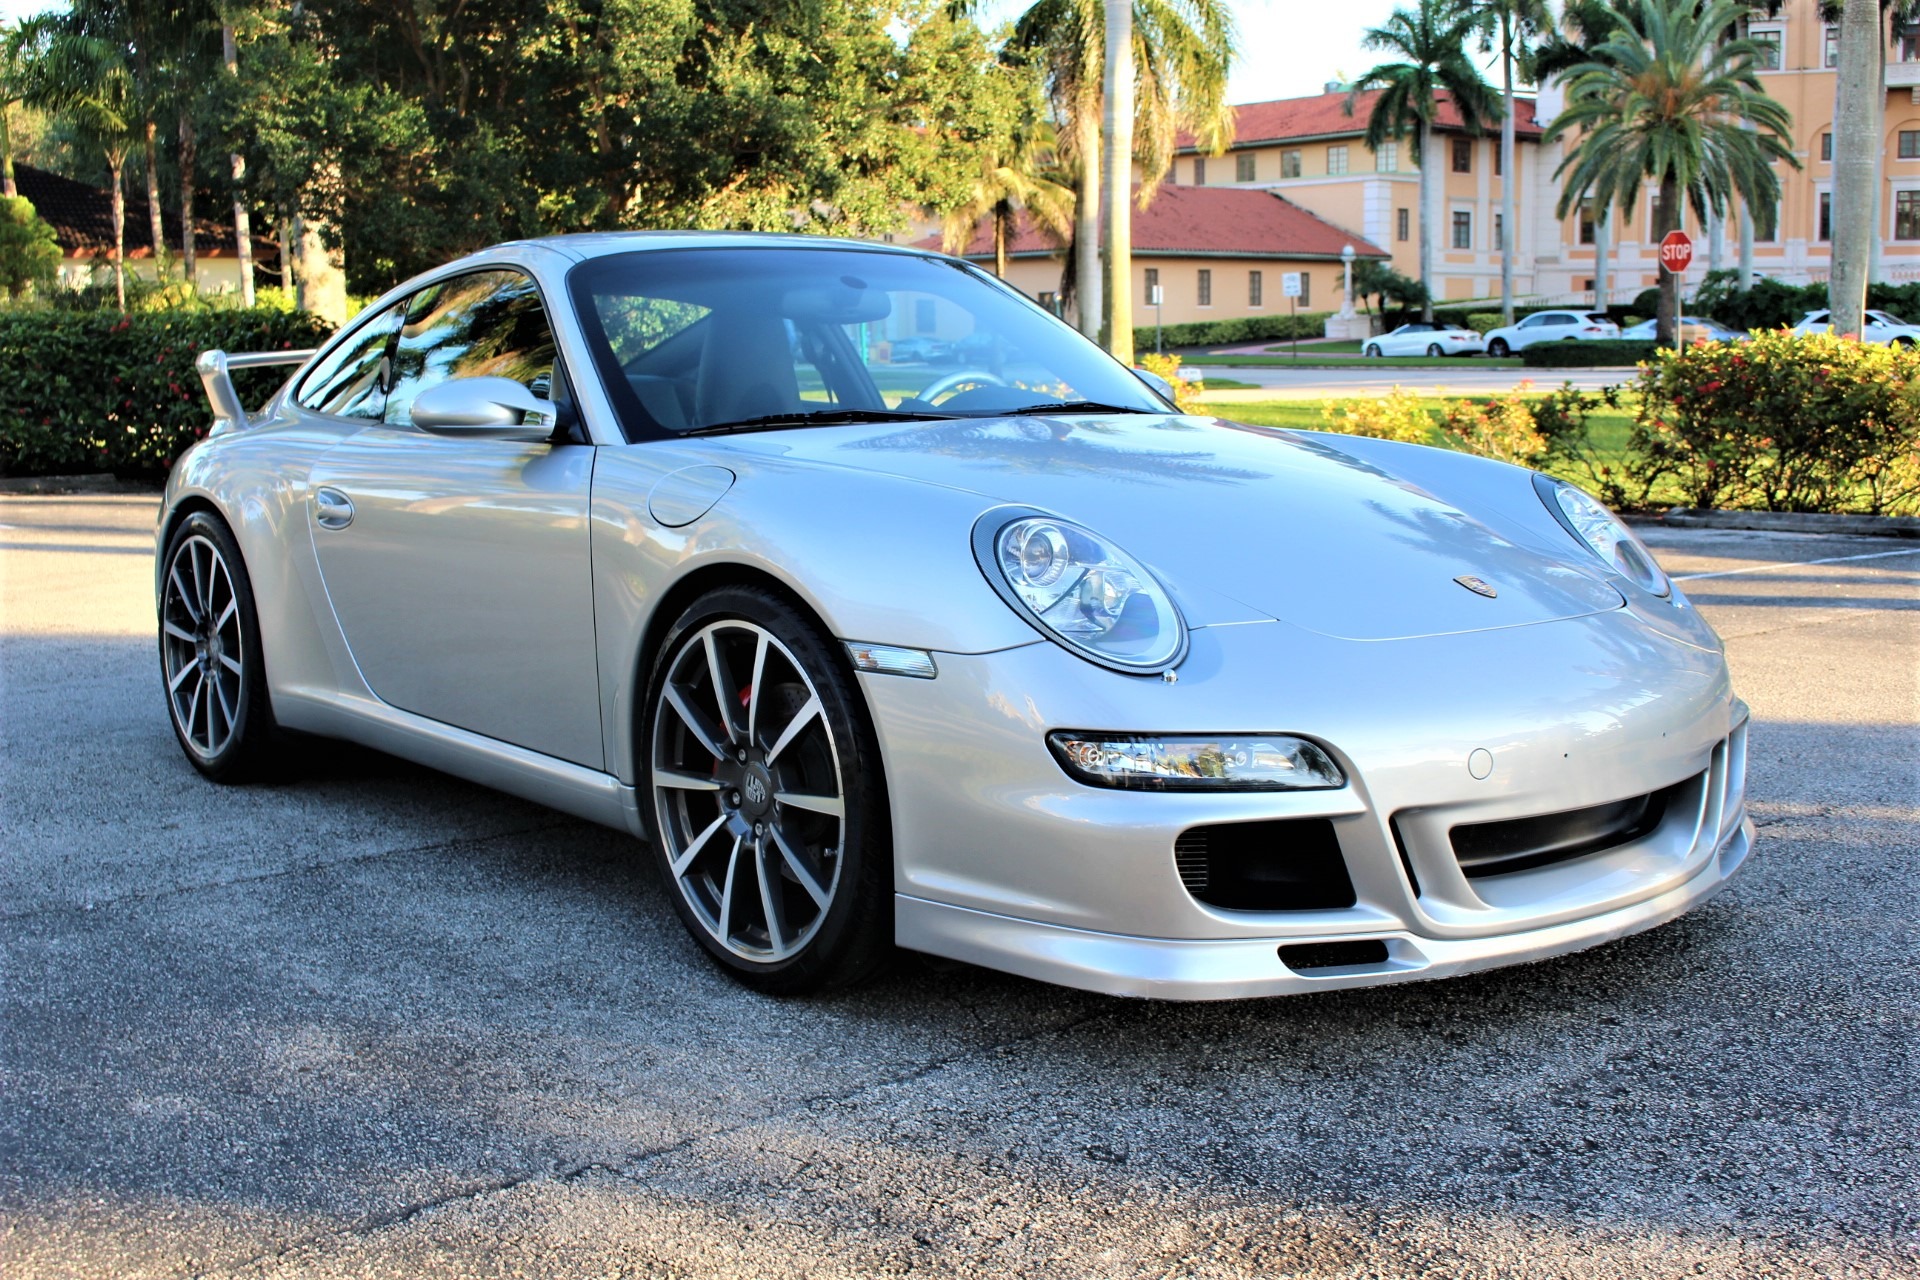 Used 2006 Porsche 911 Carrera S for sale Sold at The Gables Sports Cars in Miami FL 33146 3